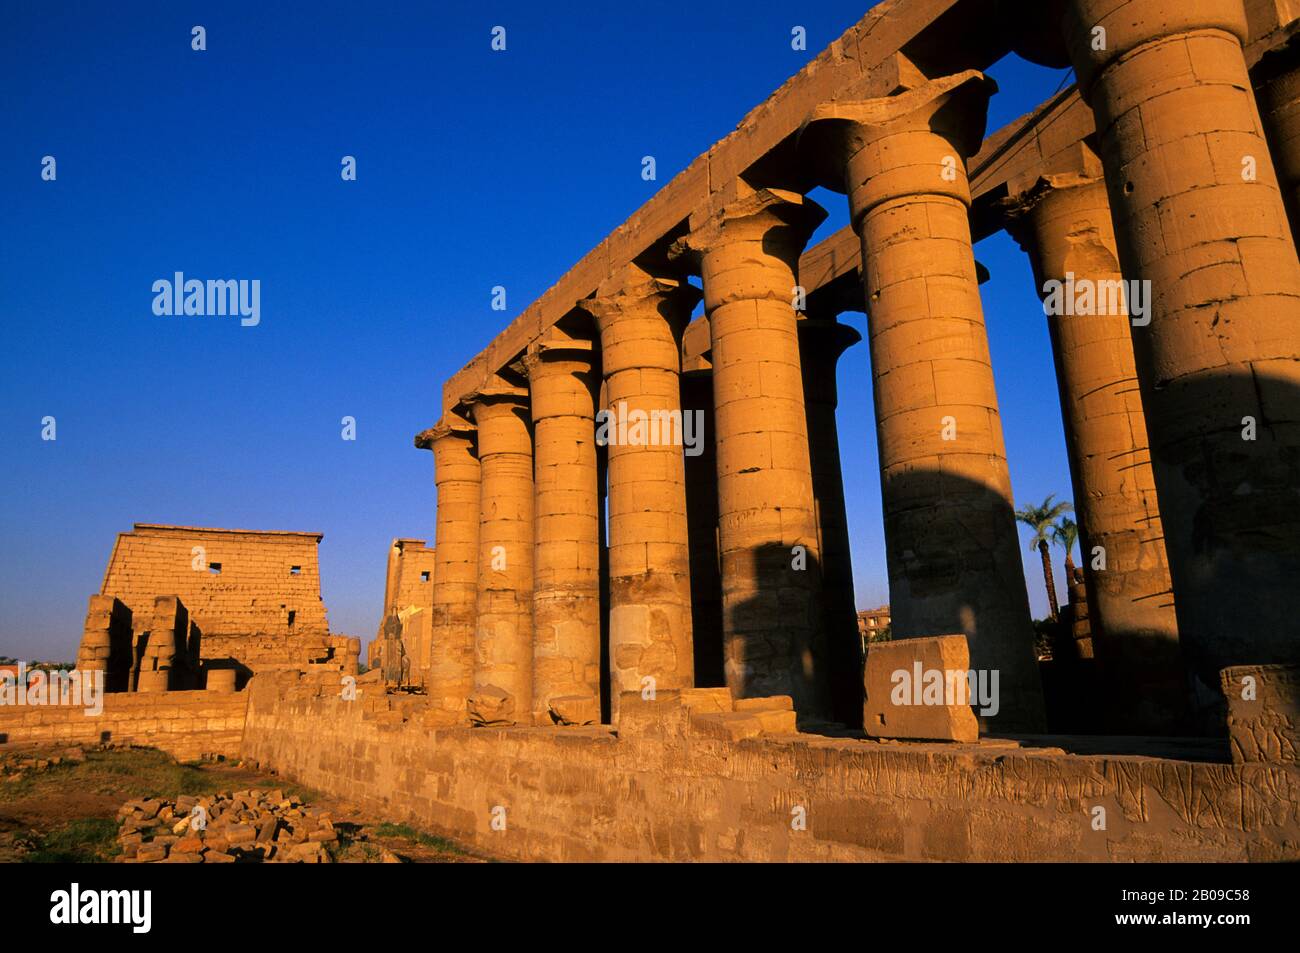 EGYPT, NILE RIVER, LUXOR, TEMPLE OF LUXOR, GREAT COLONNADE Stock Photo